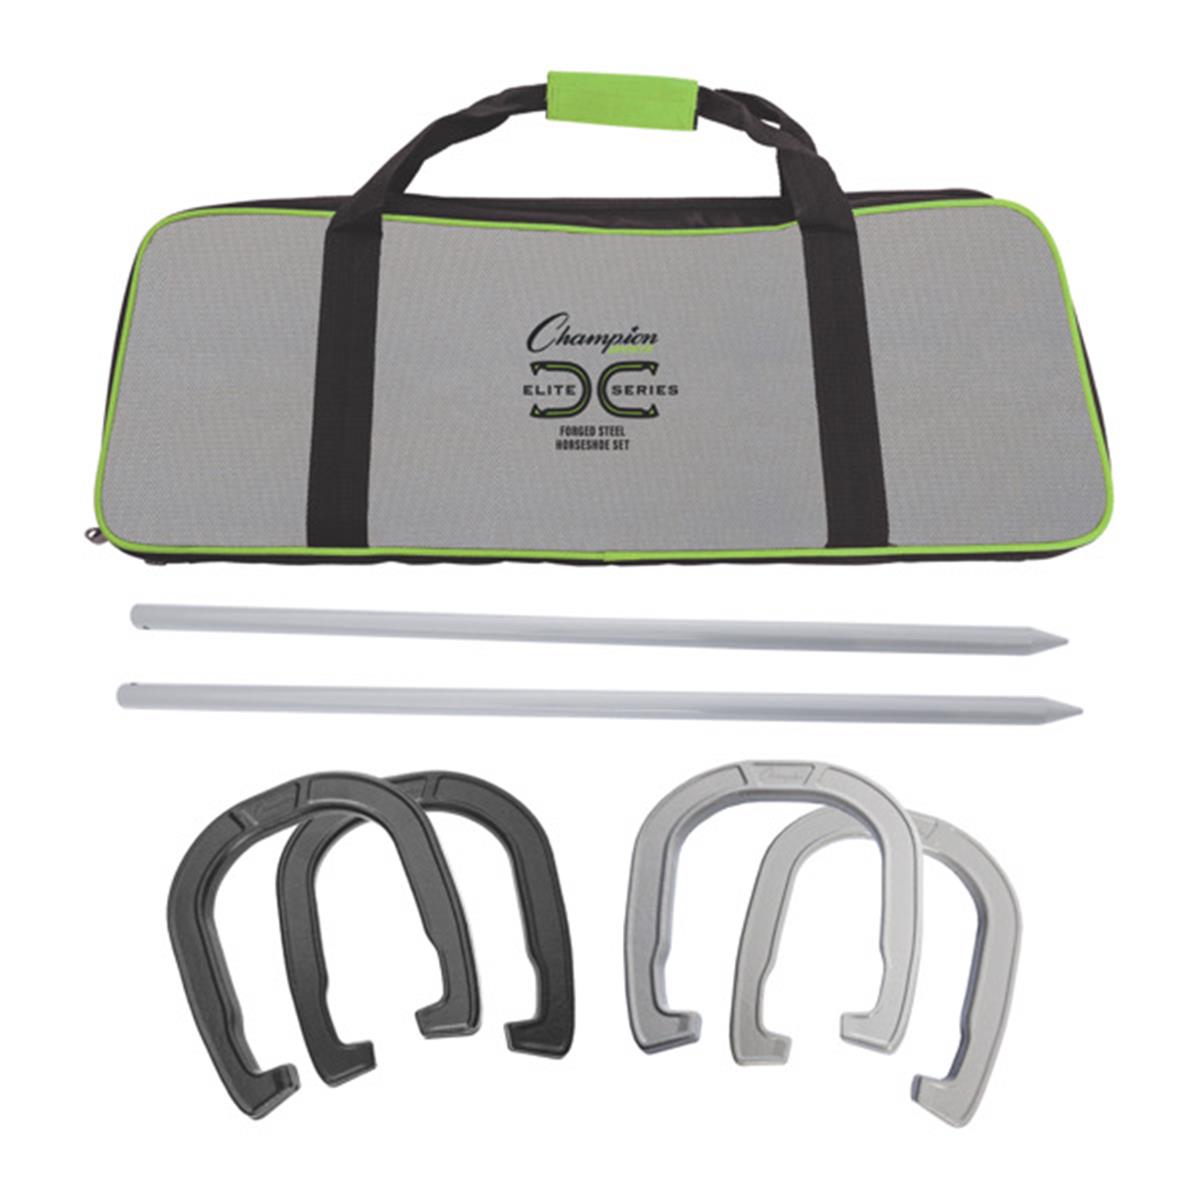 Picture of Champion Sports CG210 Elite Series Forged Steel Horseshoe Set